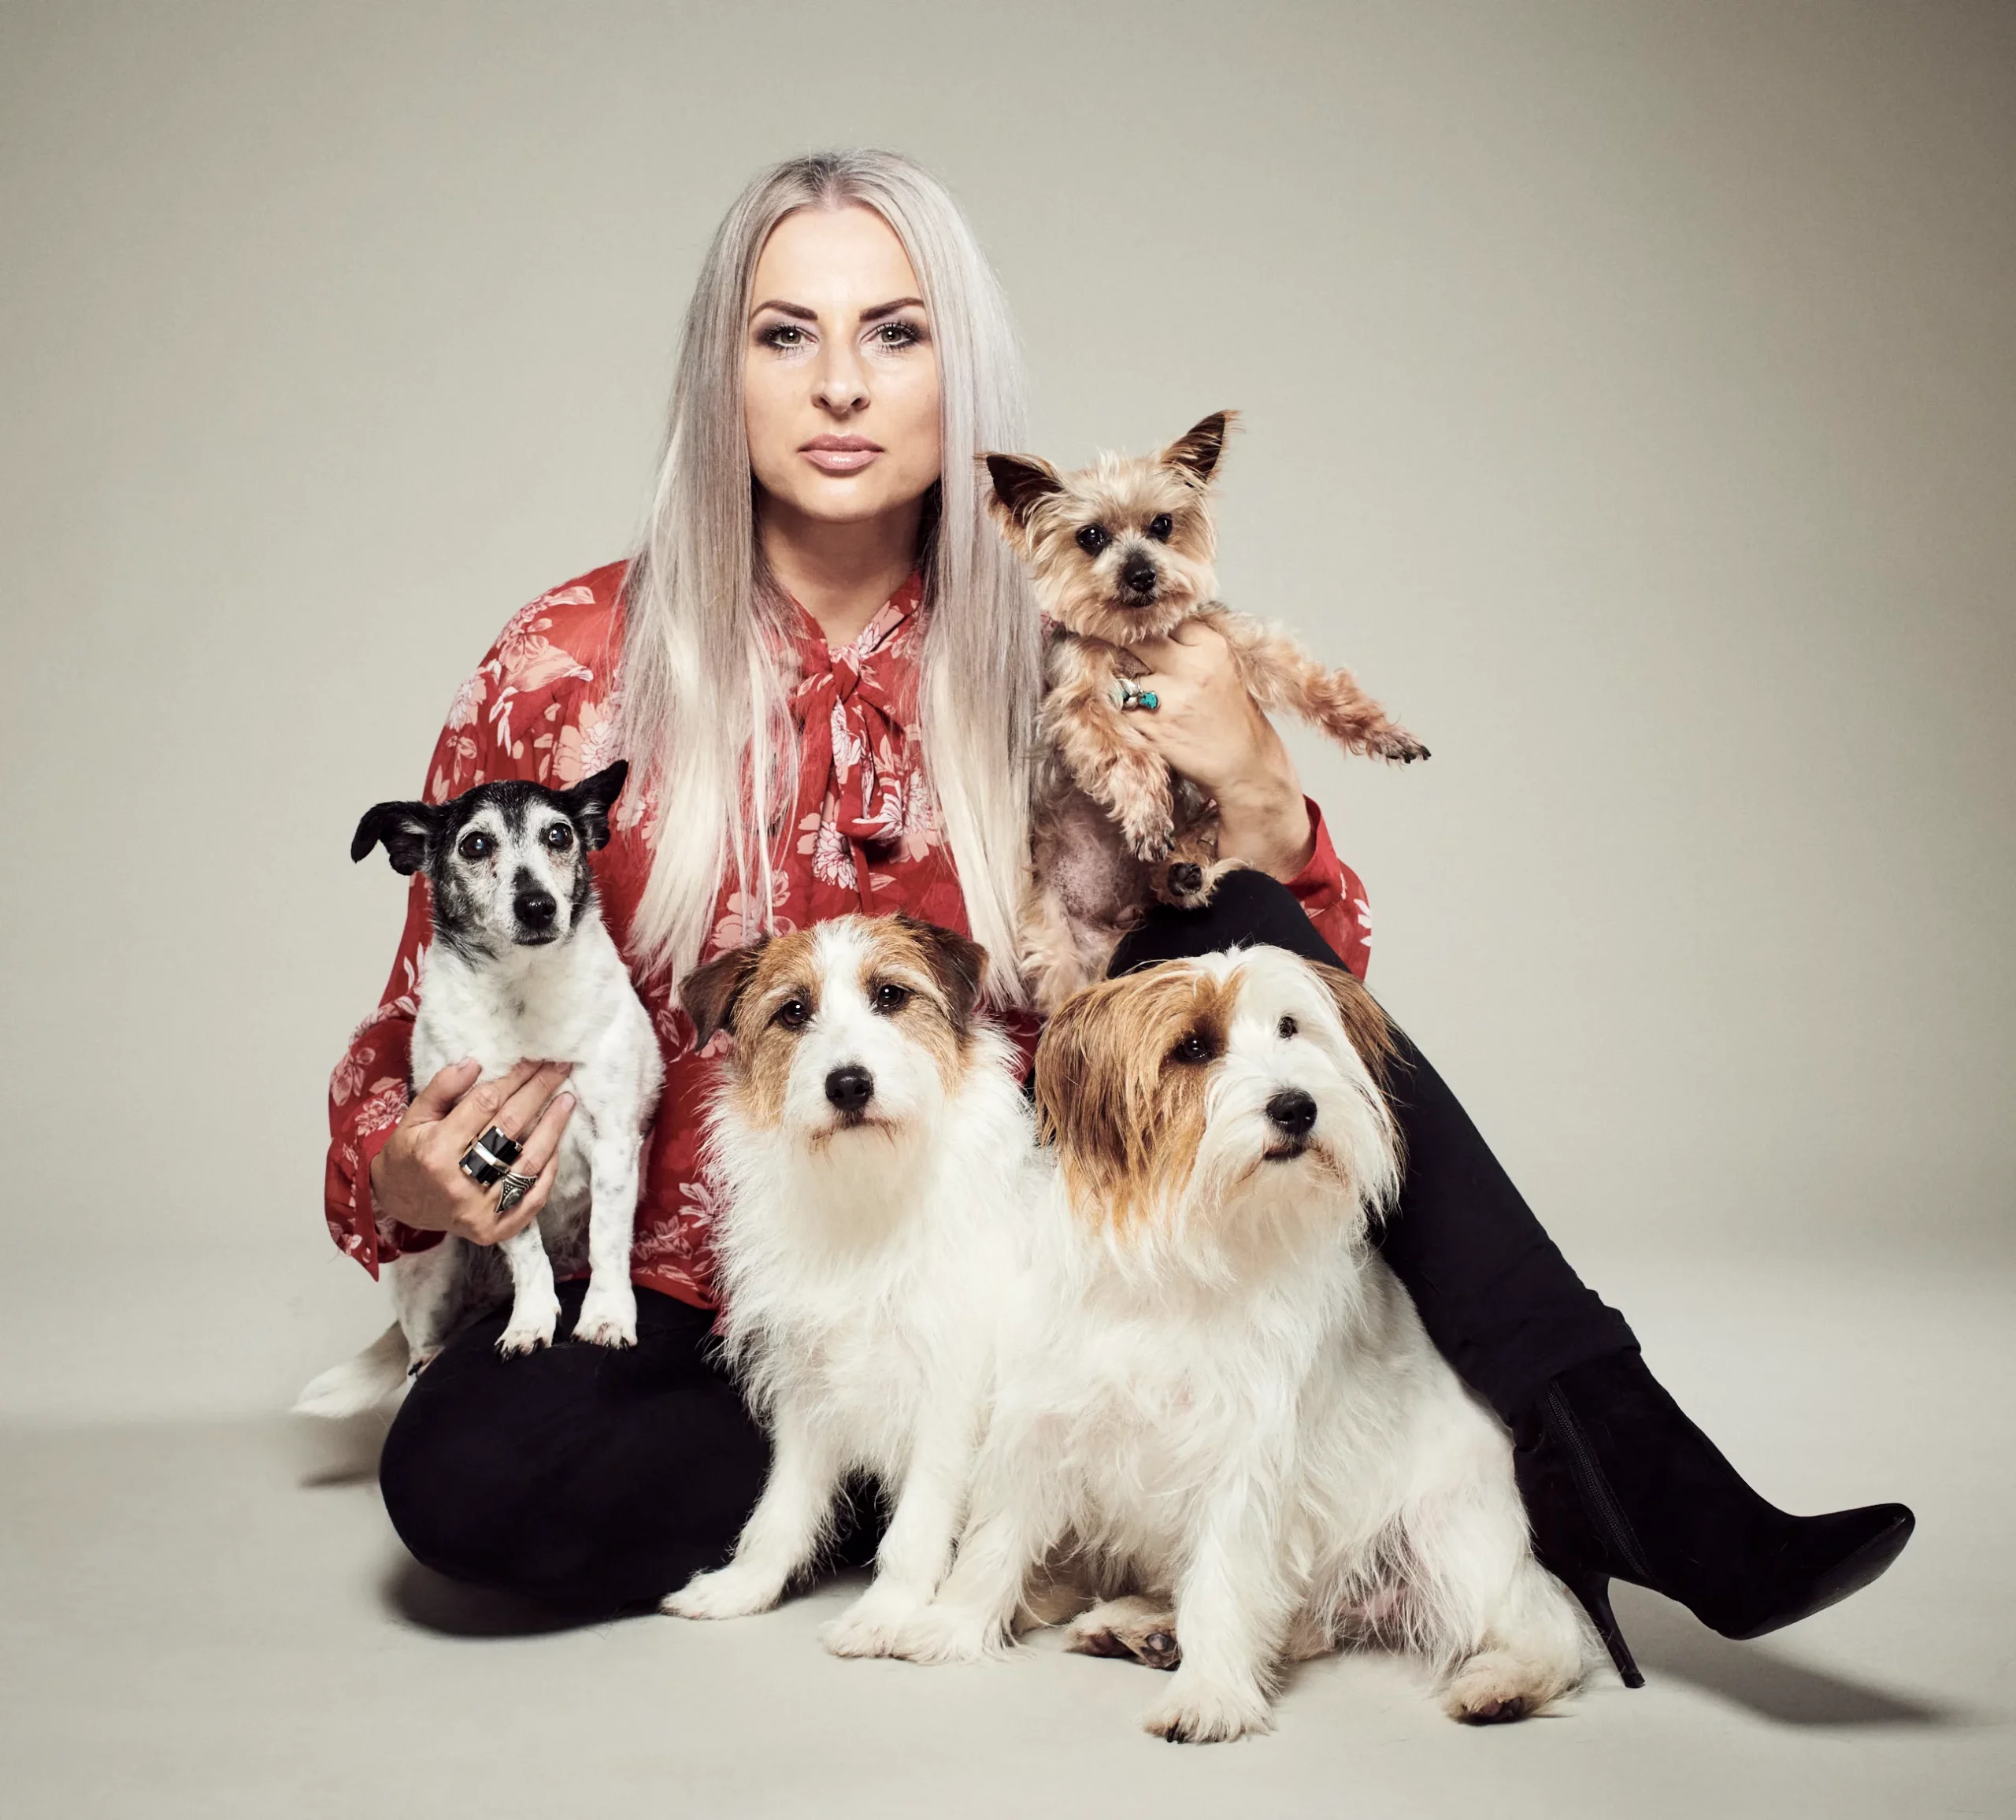 Anita Frank Profil Photo together with her dogs